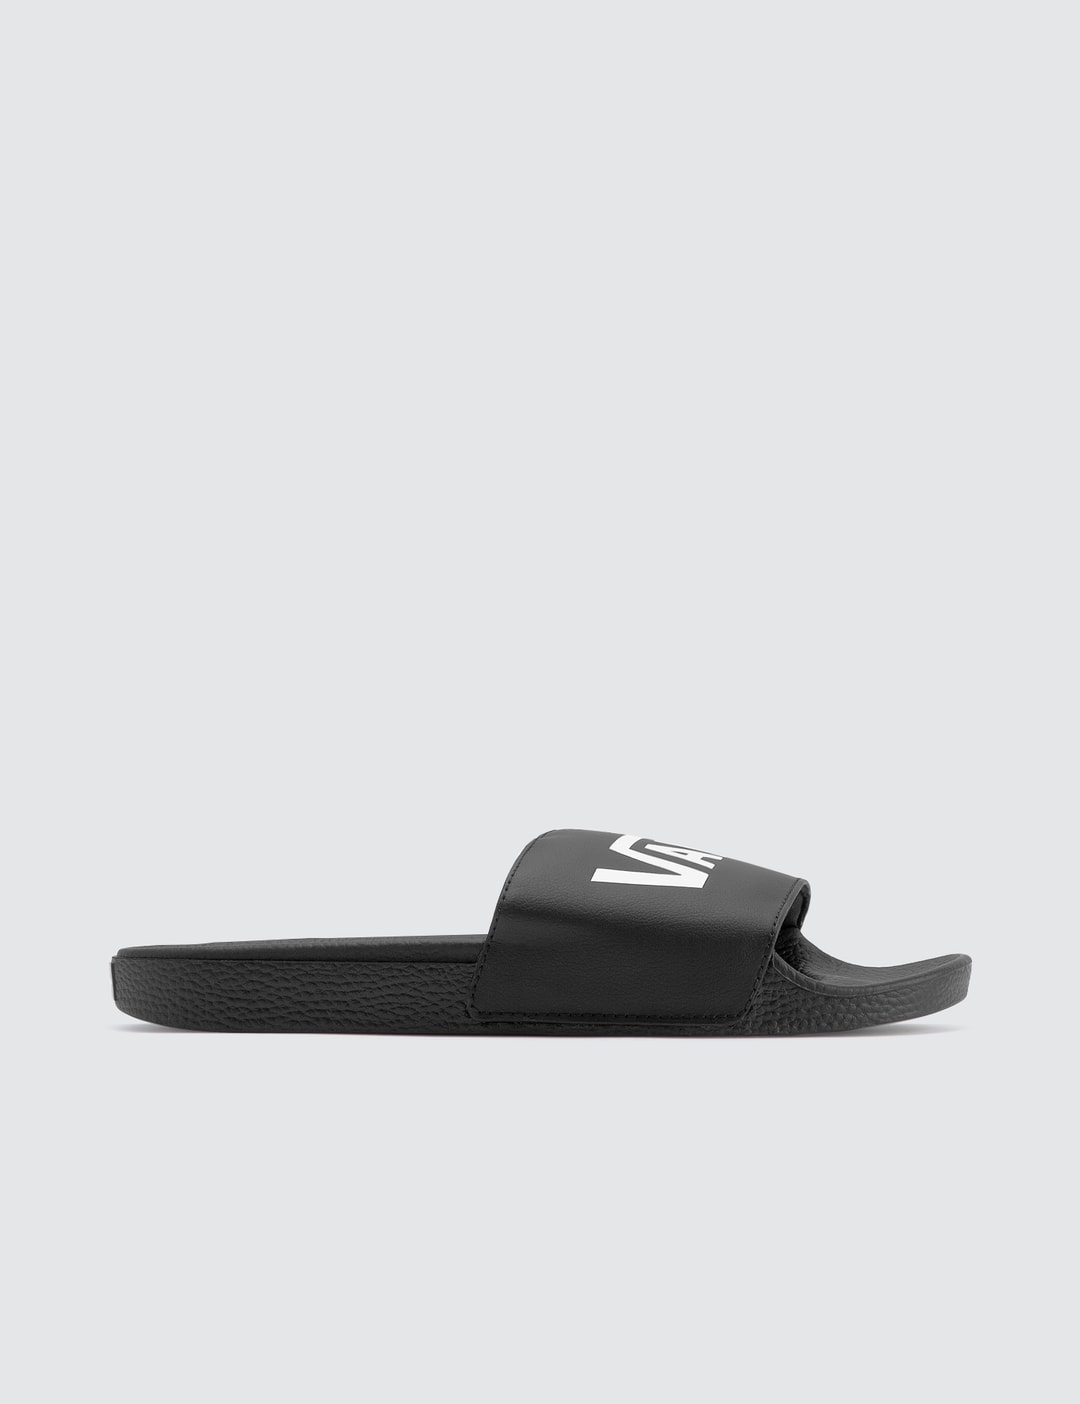 Vans - Slide-on Sandals | HBX - Globally Curated Fashion and Lifestyle ...